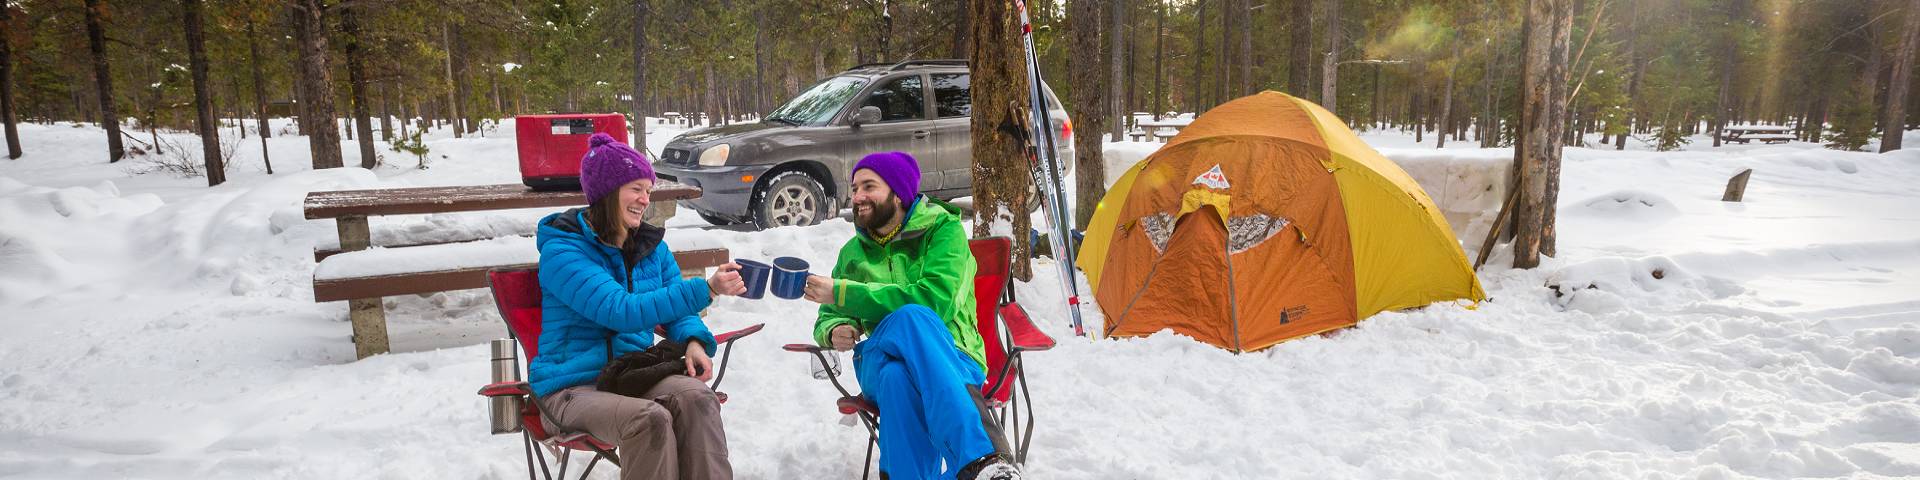 A couple near a tent in the snow